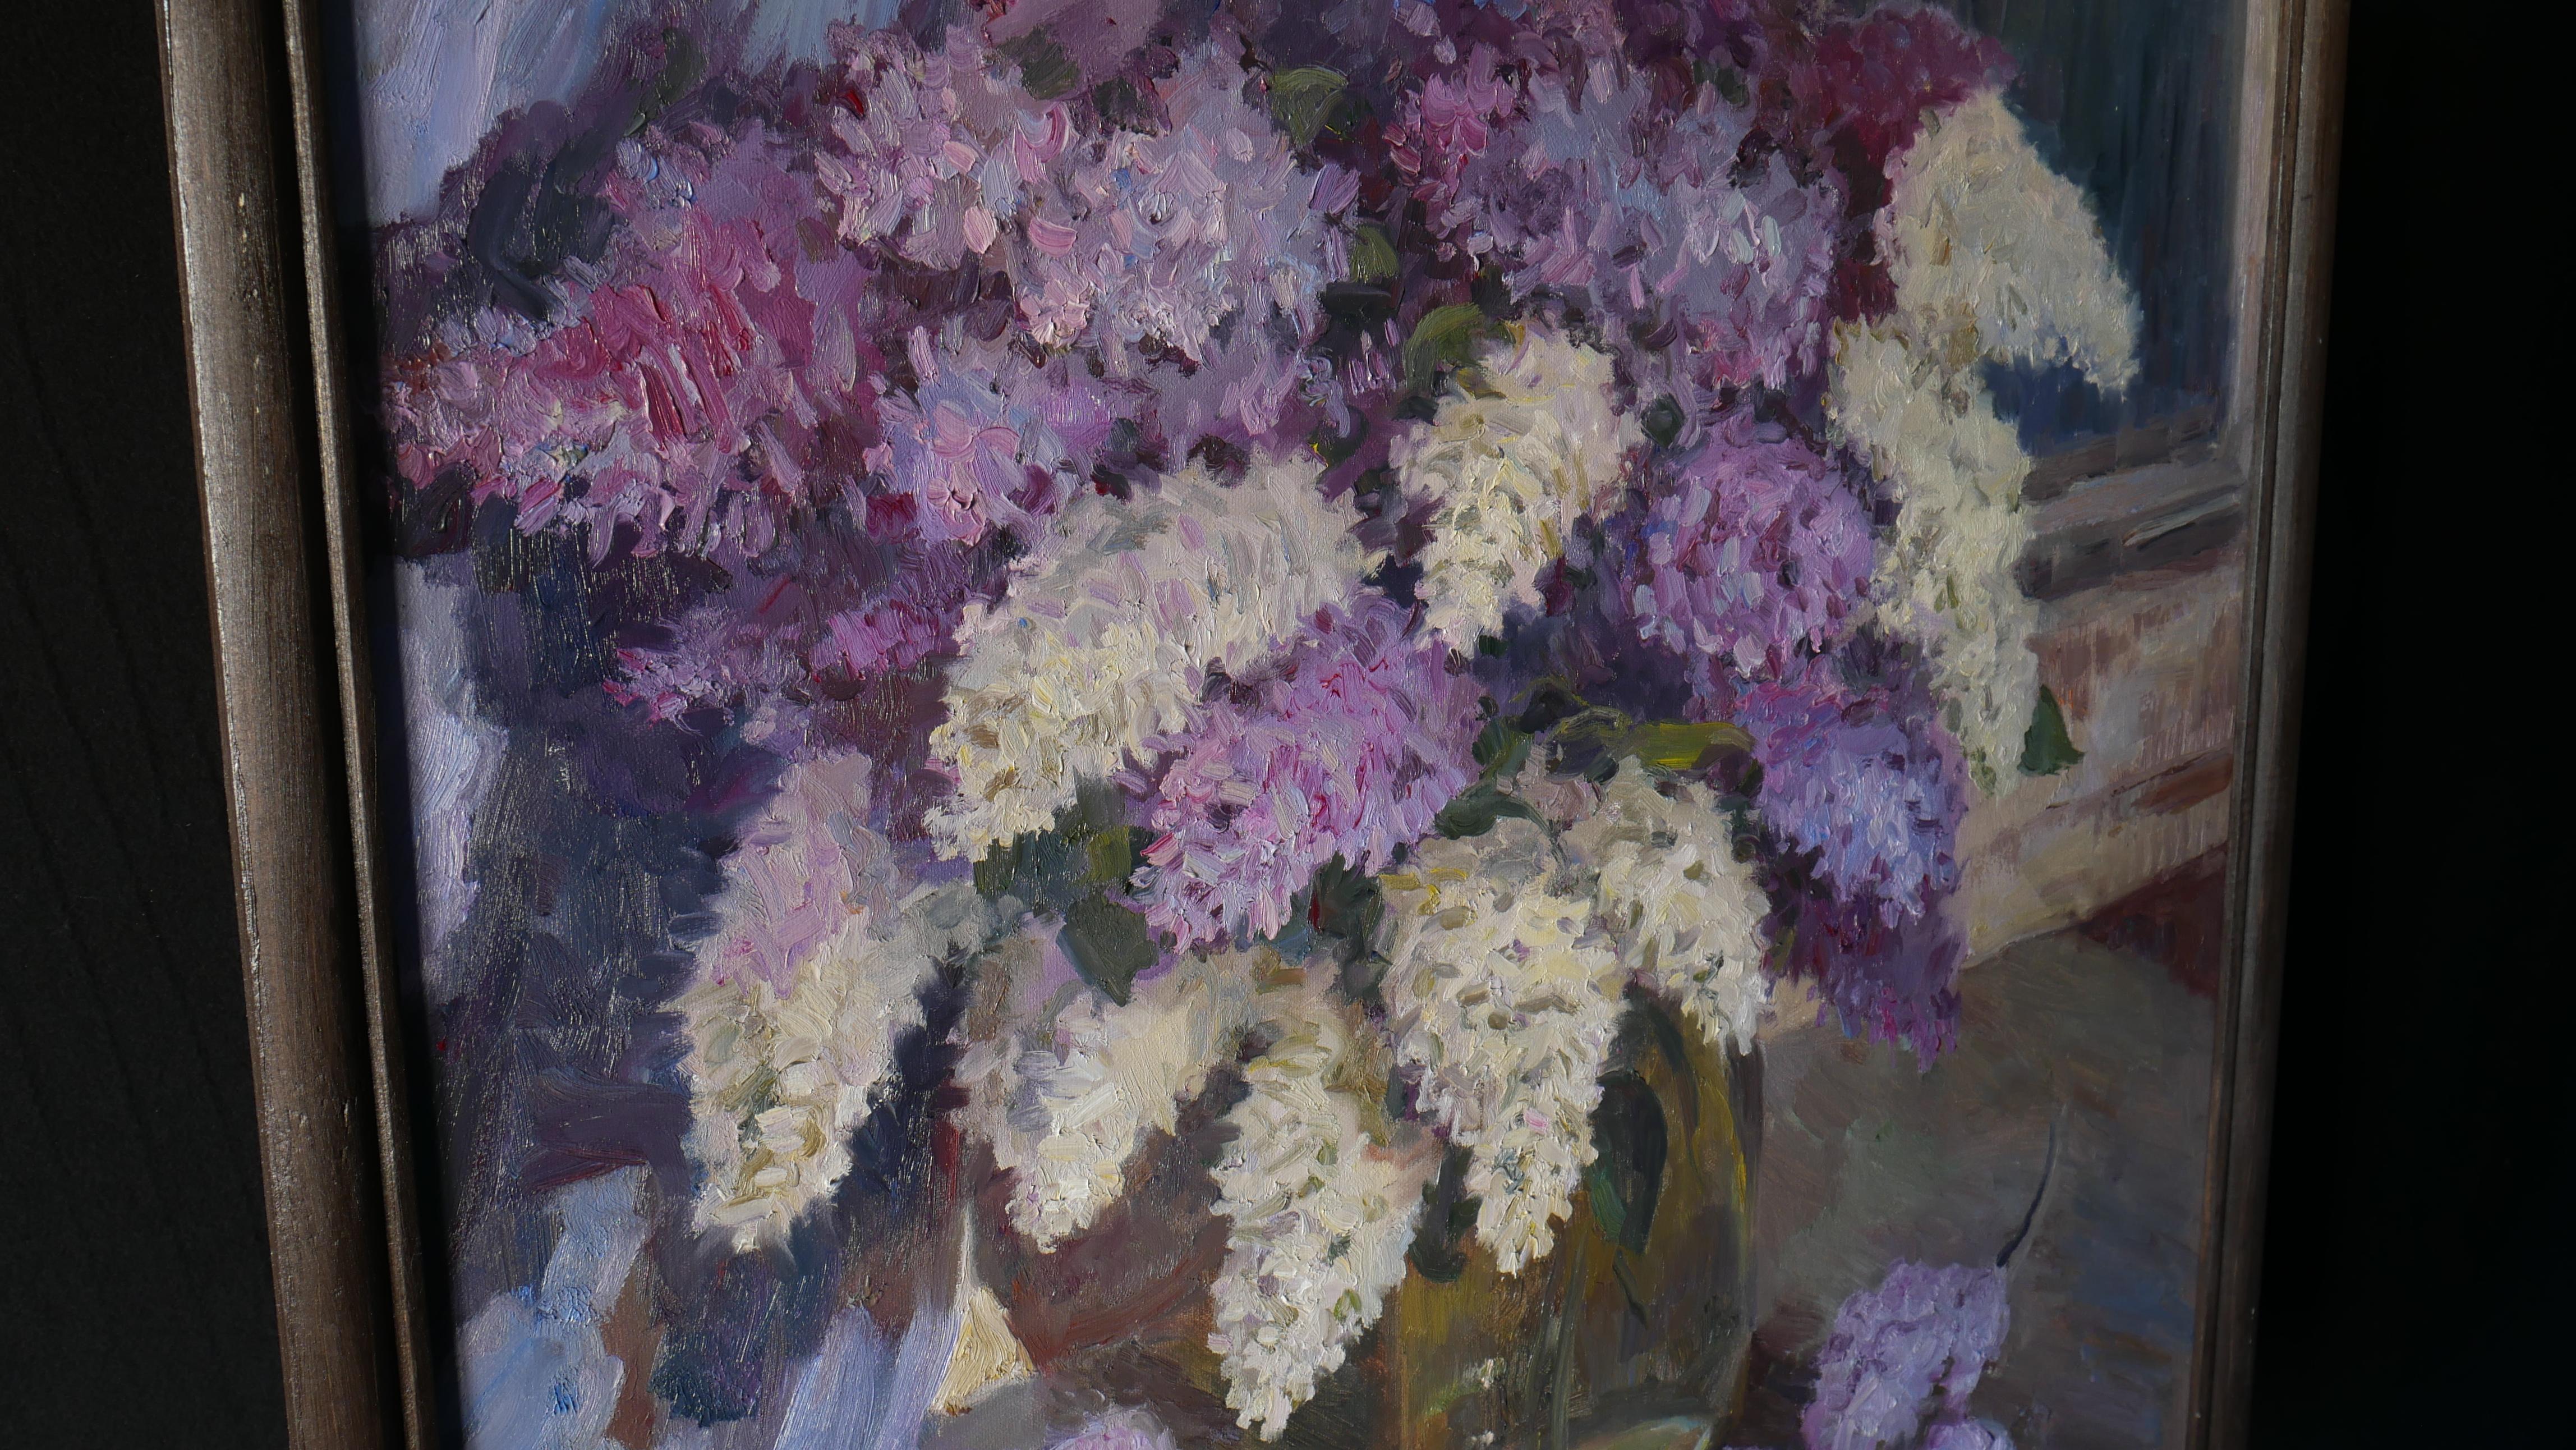 The night still life with a bouquet of lilacs will become a remarkable and modern home decoration, blooming lilacs branches always decorates any house interior, the impressionistic artwork is created in purple colours. Lilacs are favourite floral